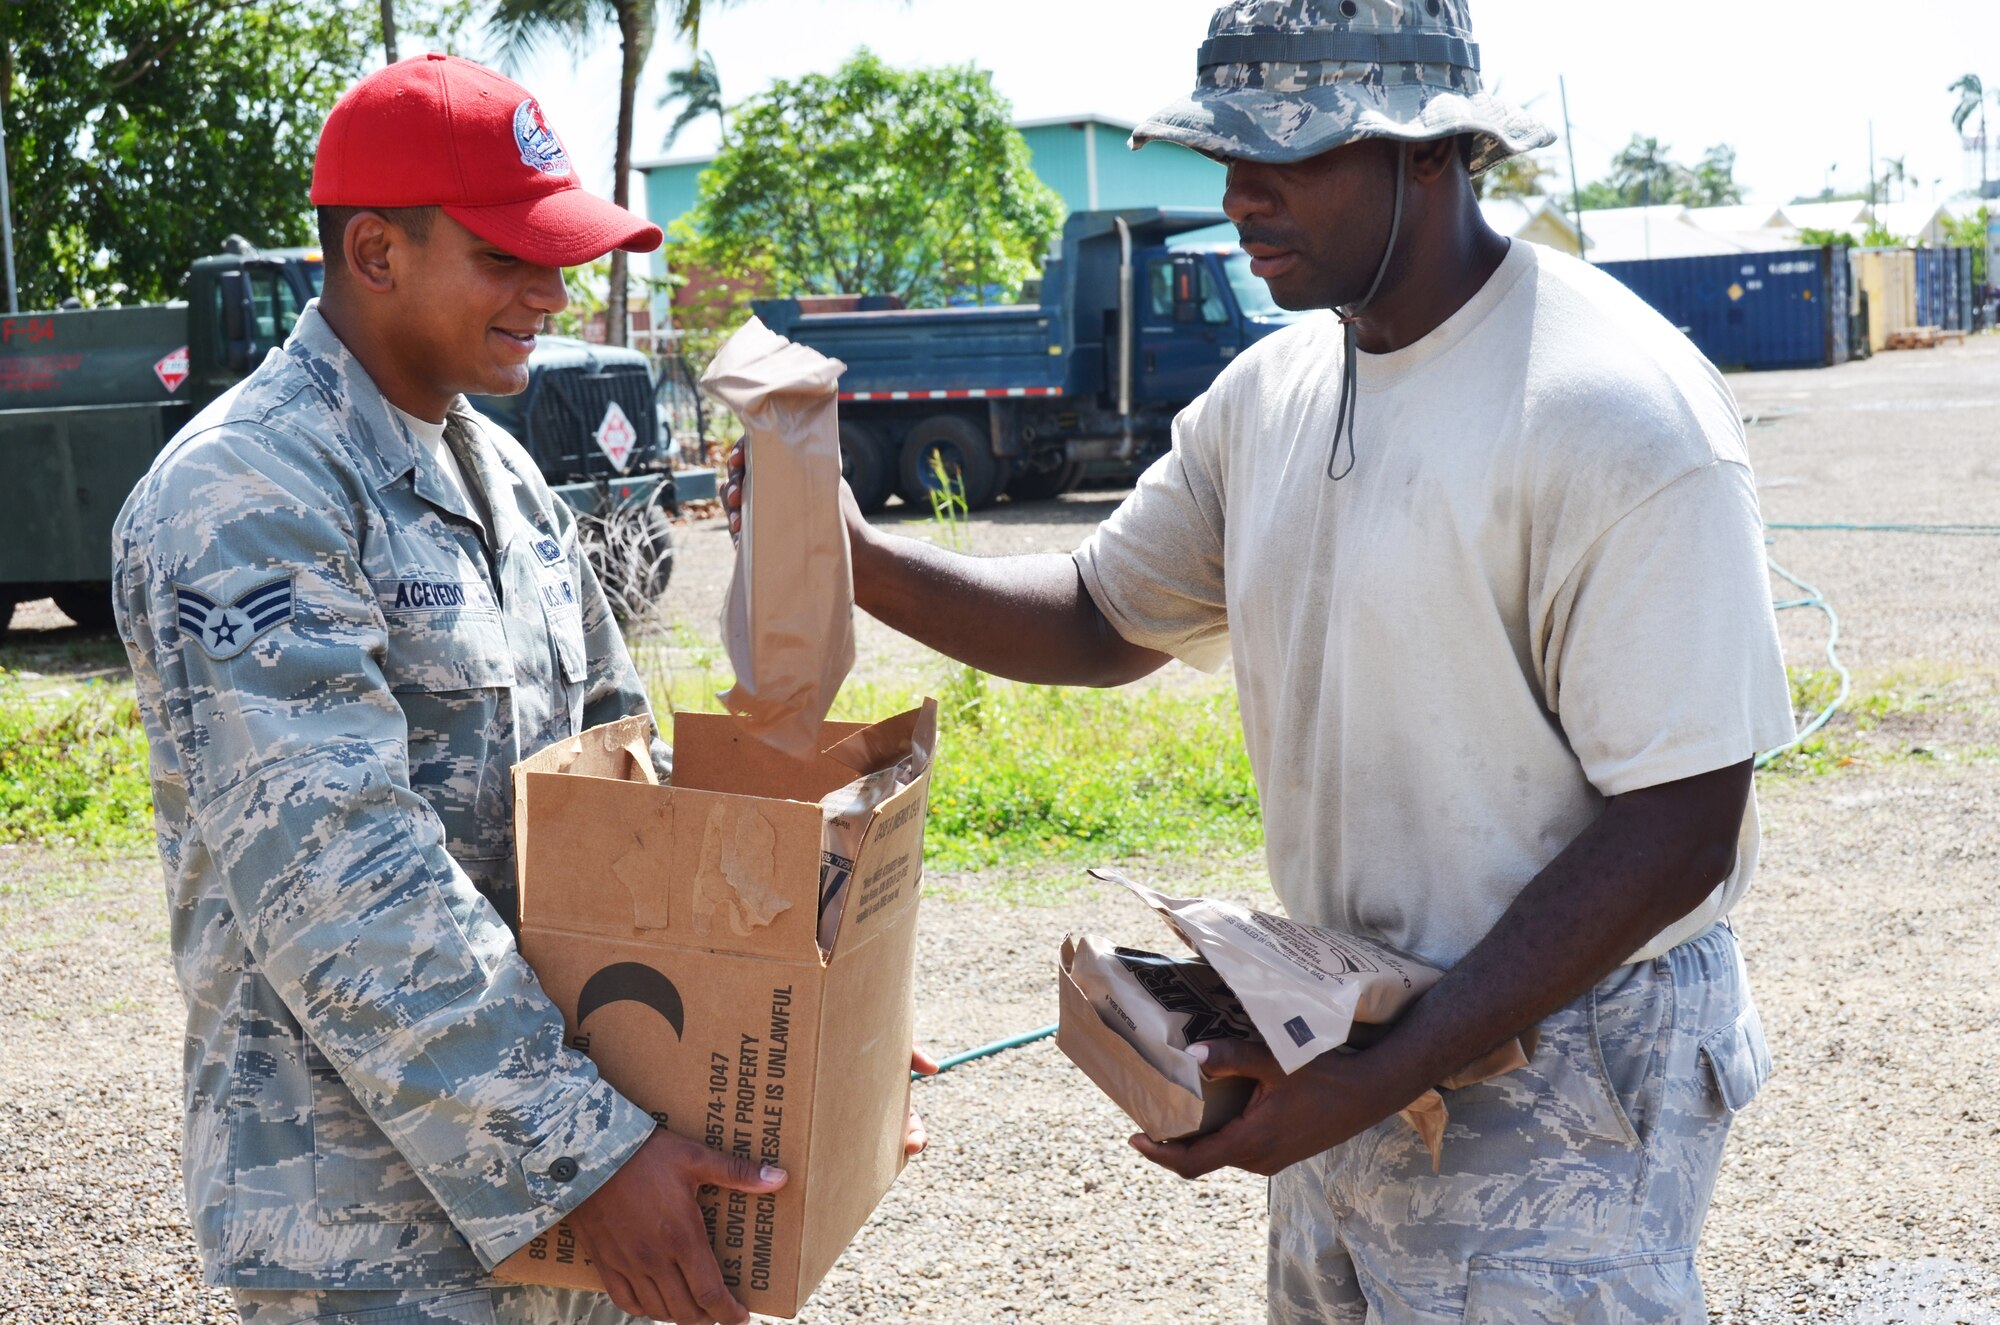 Senior Airman Mario Acevedo (left), a New Horizons services journeyman deployed from the 820th RED HORSE Squadron, Nellis Air Force Base, Nevada, issues MREs to Staff Sgt. Smette Pompfilius, New Horizons vehicle maintenance, June 24, 2014, in Ladyville, Belize.


